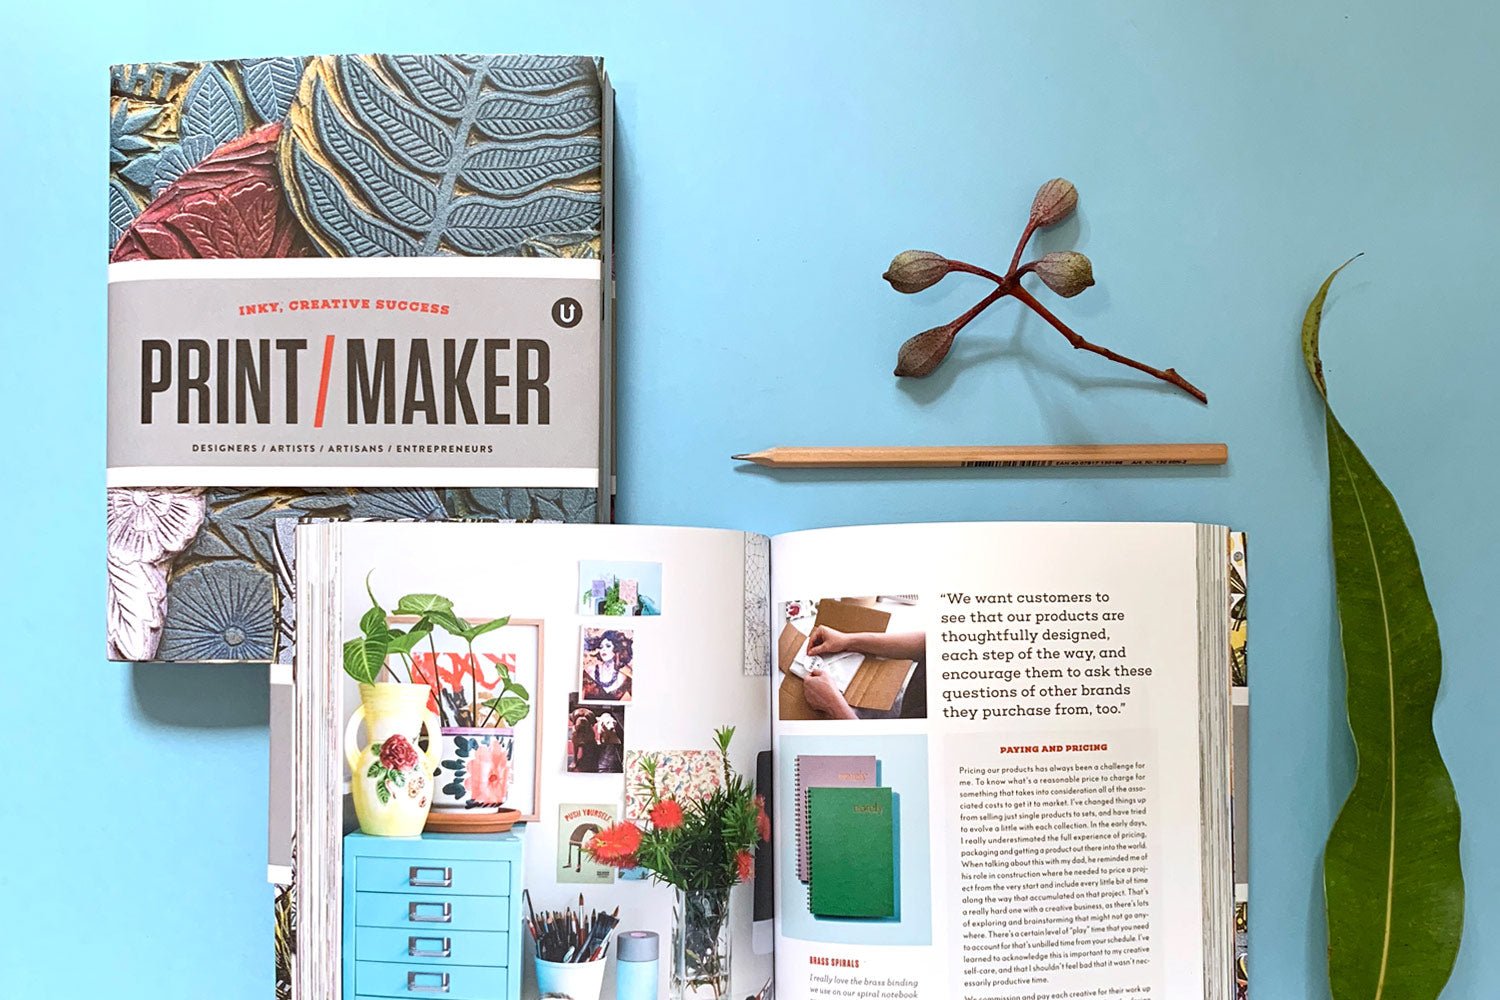 Featured with global print designers and crafts people in Print/Maker book - Notely